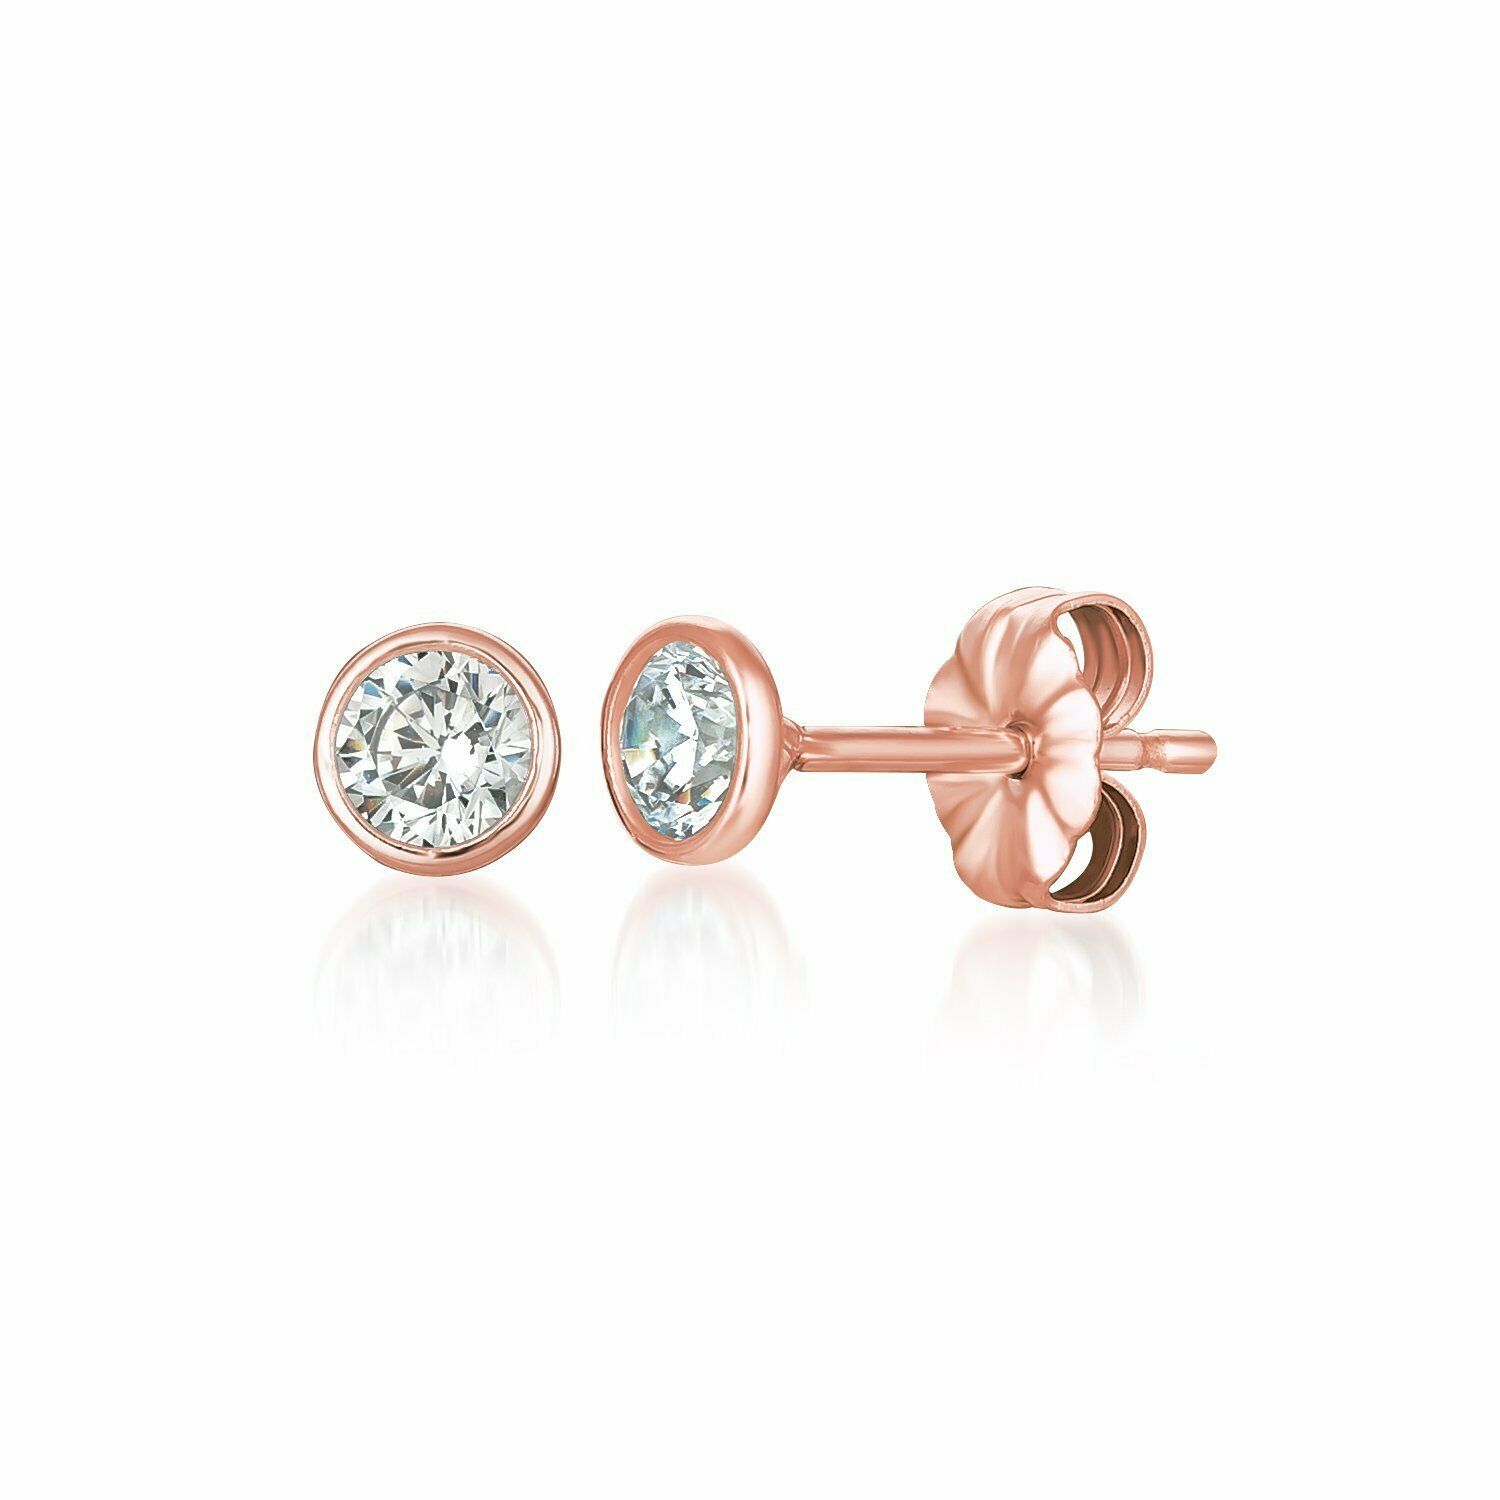 Primary image for Authentic CRISLU 4 mm Bezel Set Stud Earrings in Rose Gold